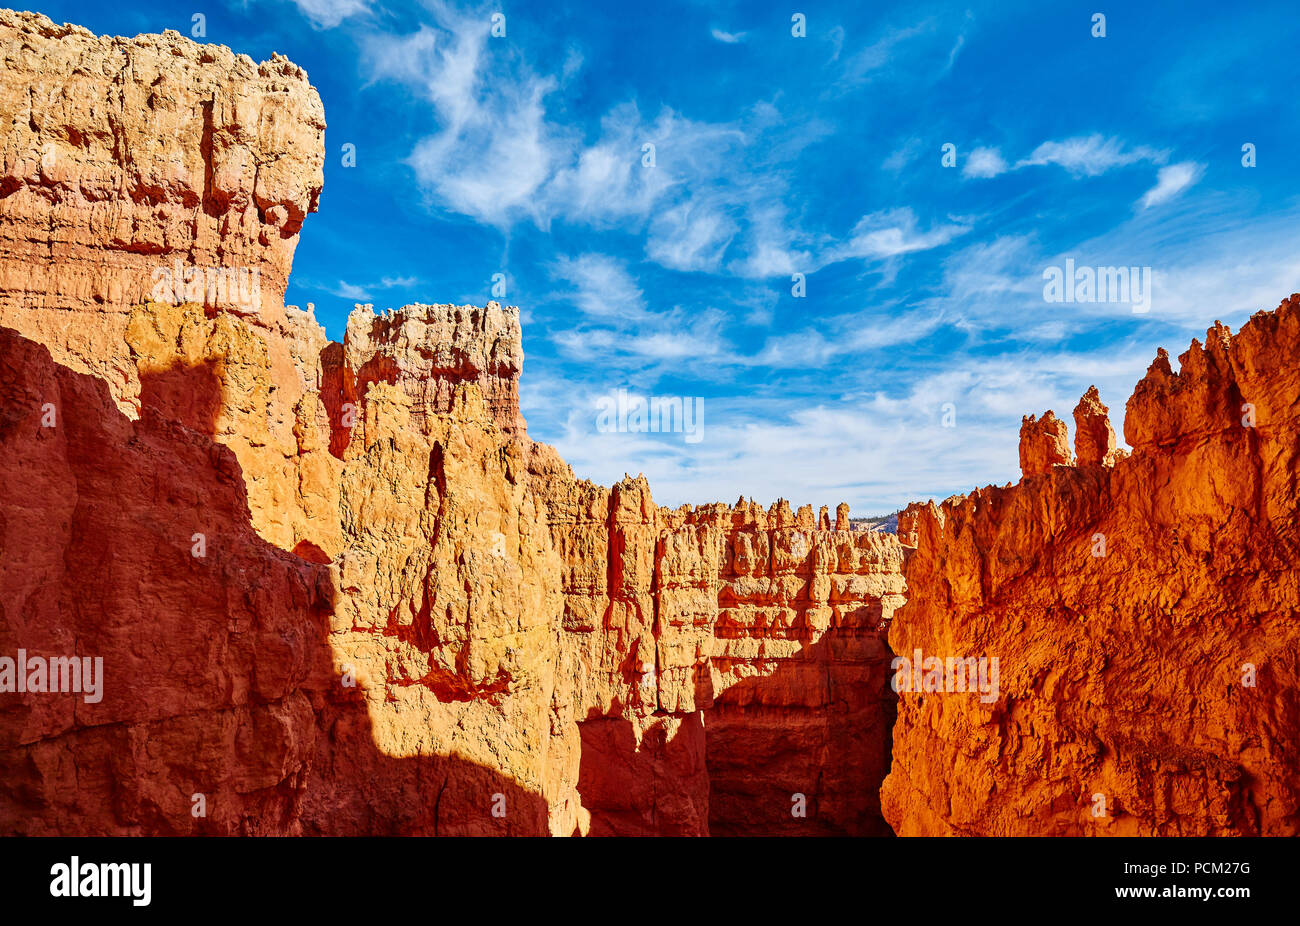 Scenic cliffs in the Bryce Canyon National Park, Utah, USA. Stock Photo